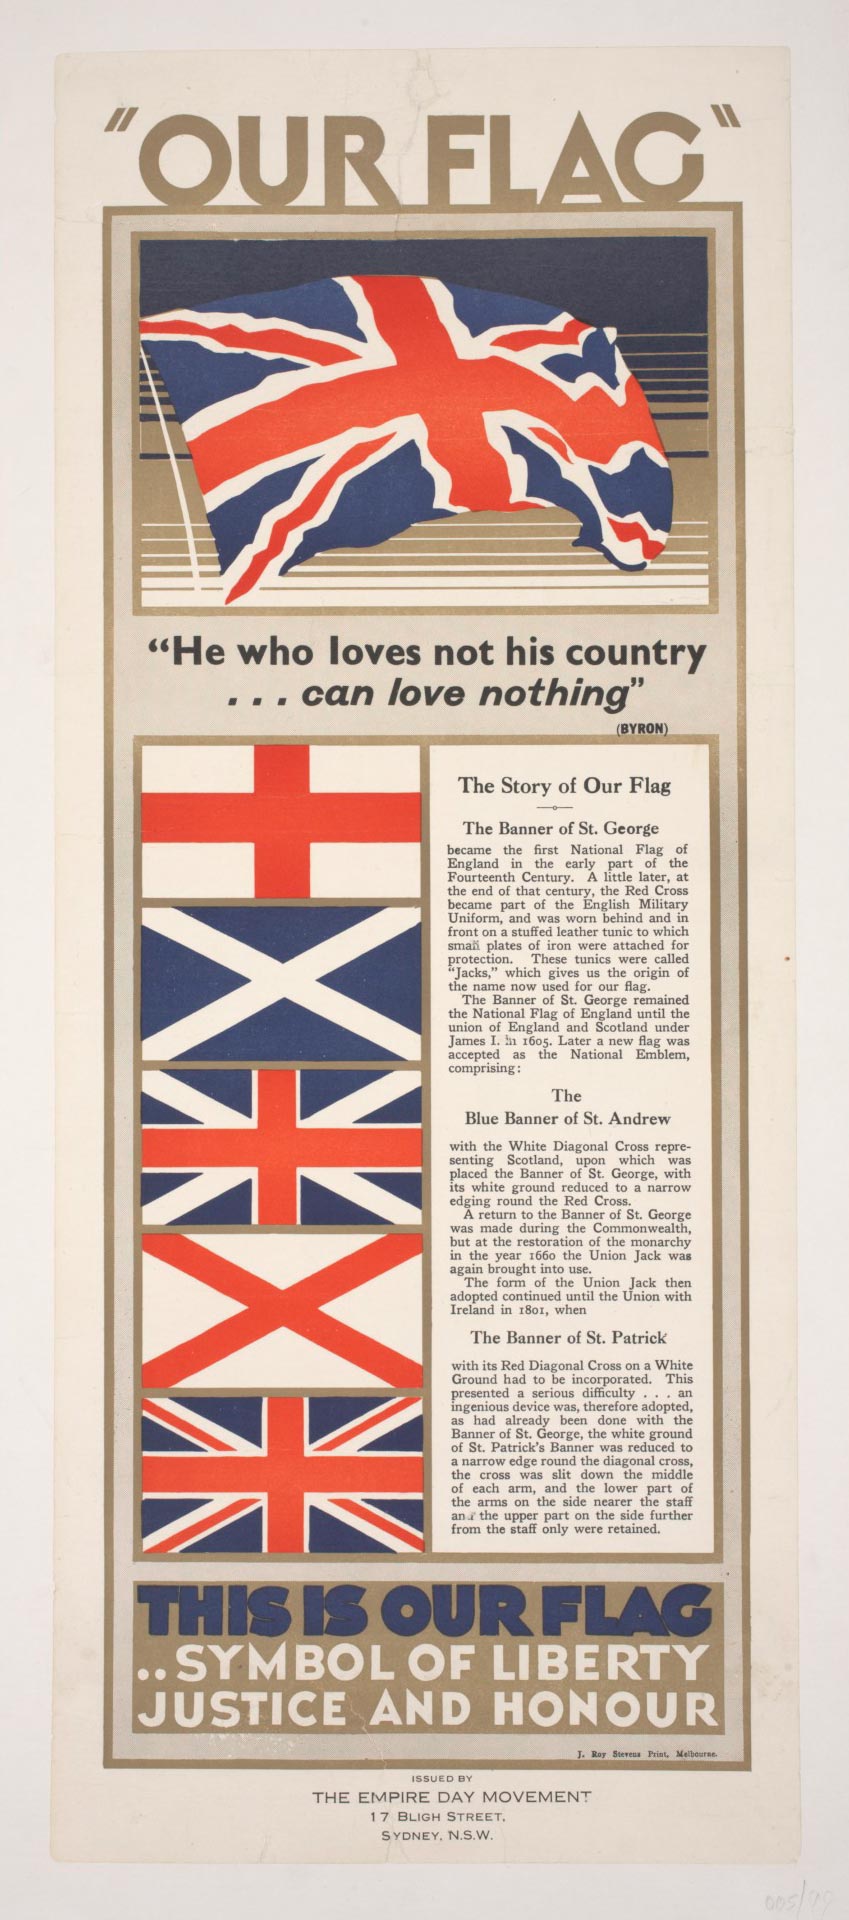 Lithograph poster featuring the Union Jack and its flags of origin, including the crosses of St George, St Andrews and St Patrick.